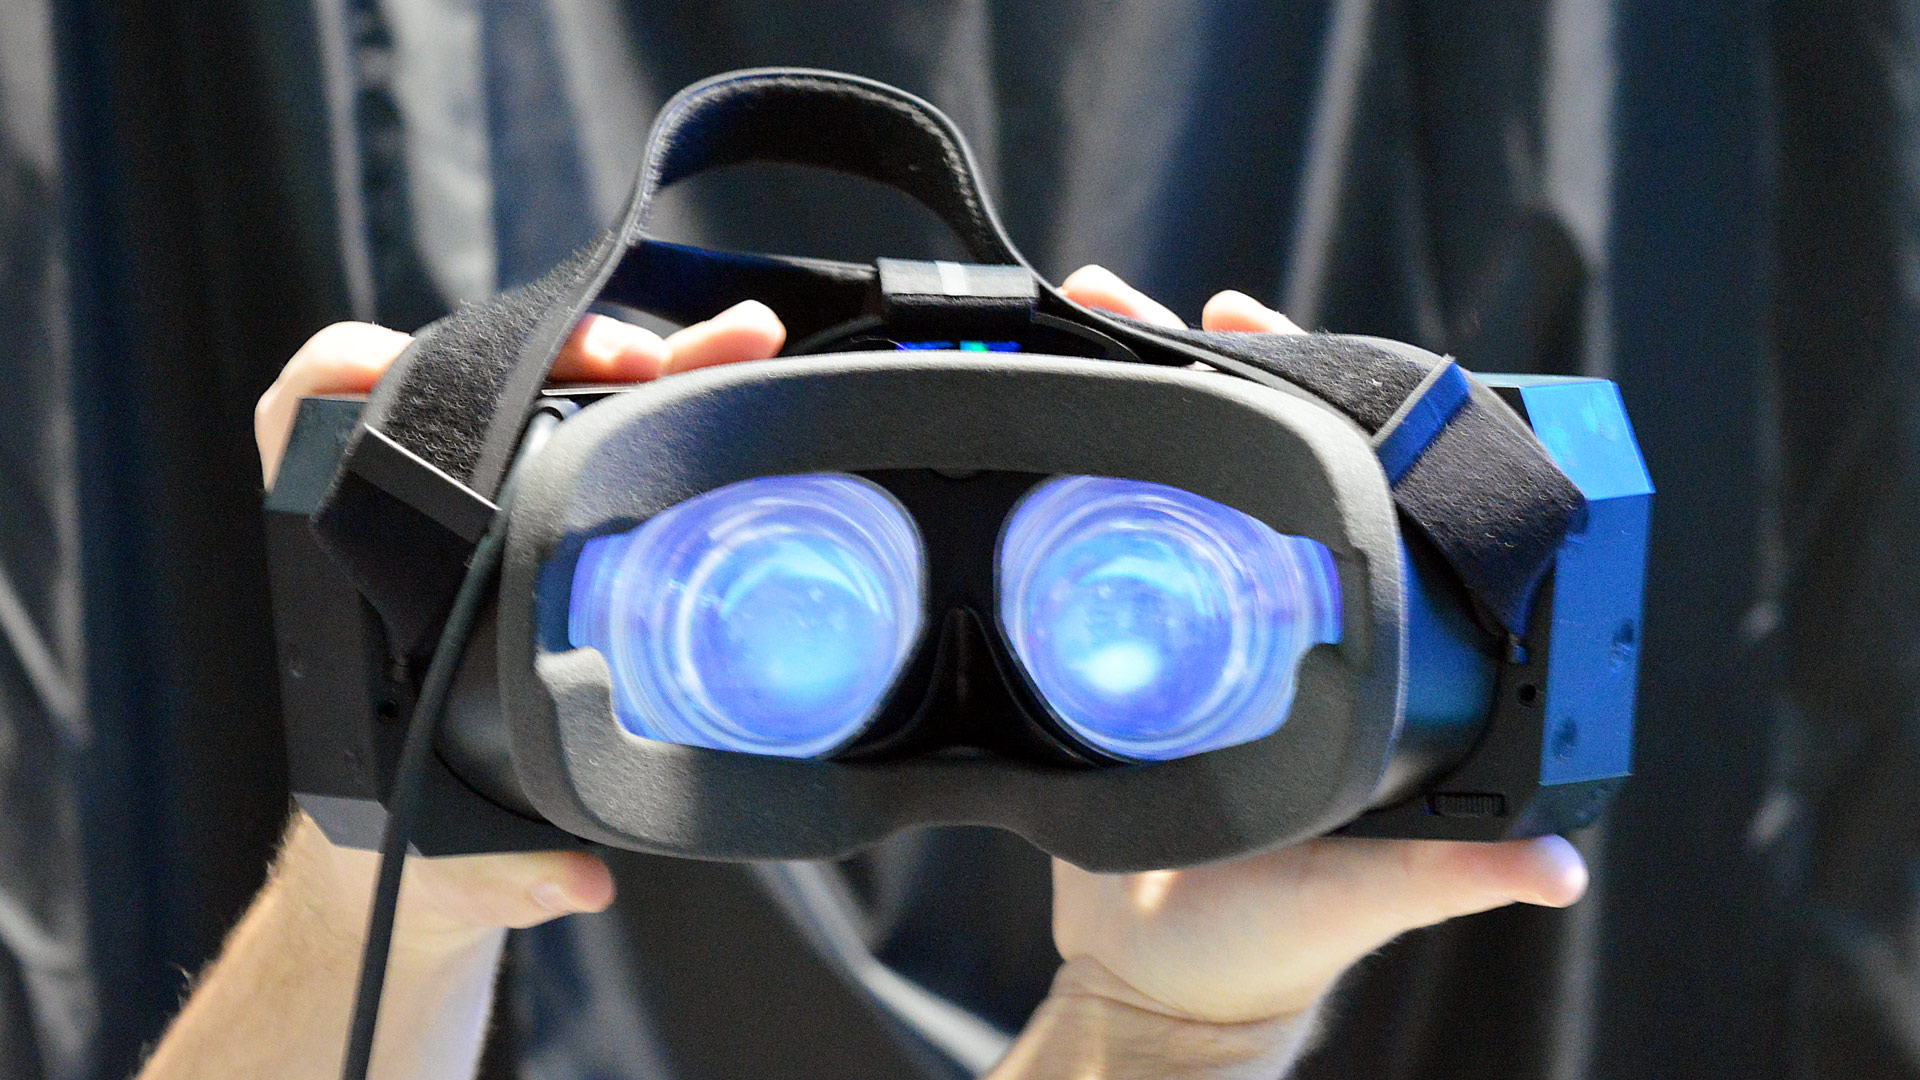 Pimax '8K' Sees Further Delays Due to Lens Design, Pre-production